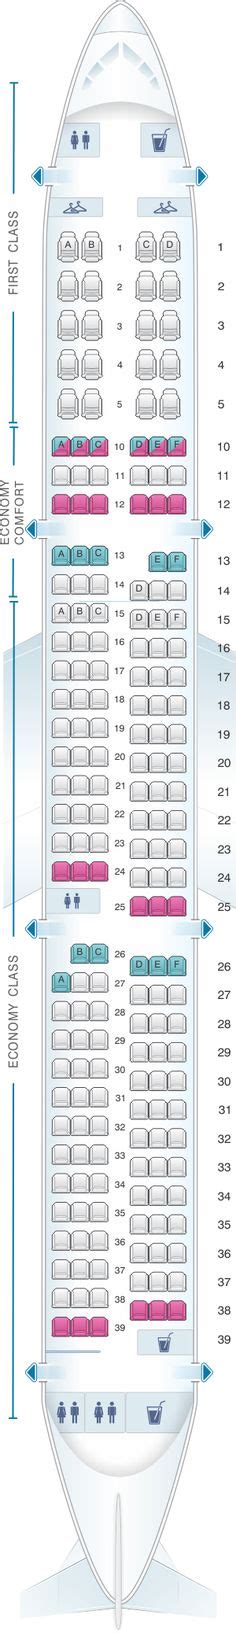 Delta Airbus A Seating Chart Porn Sex Picture